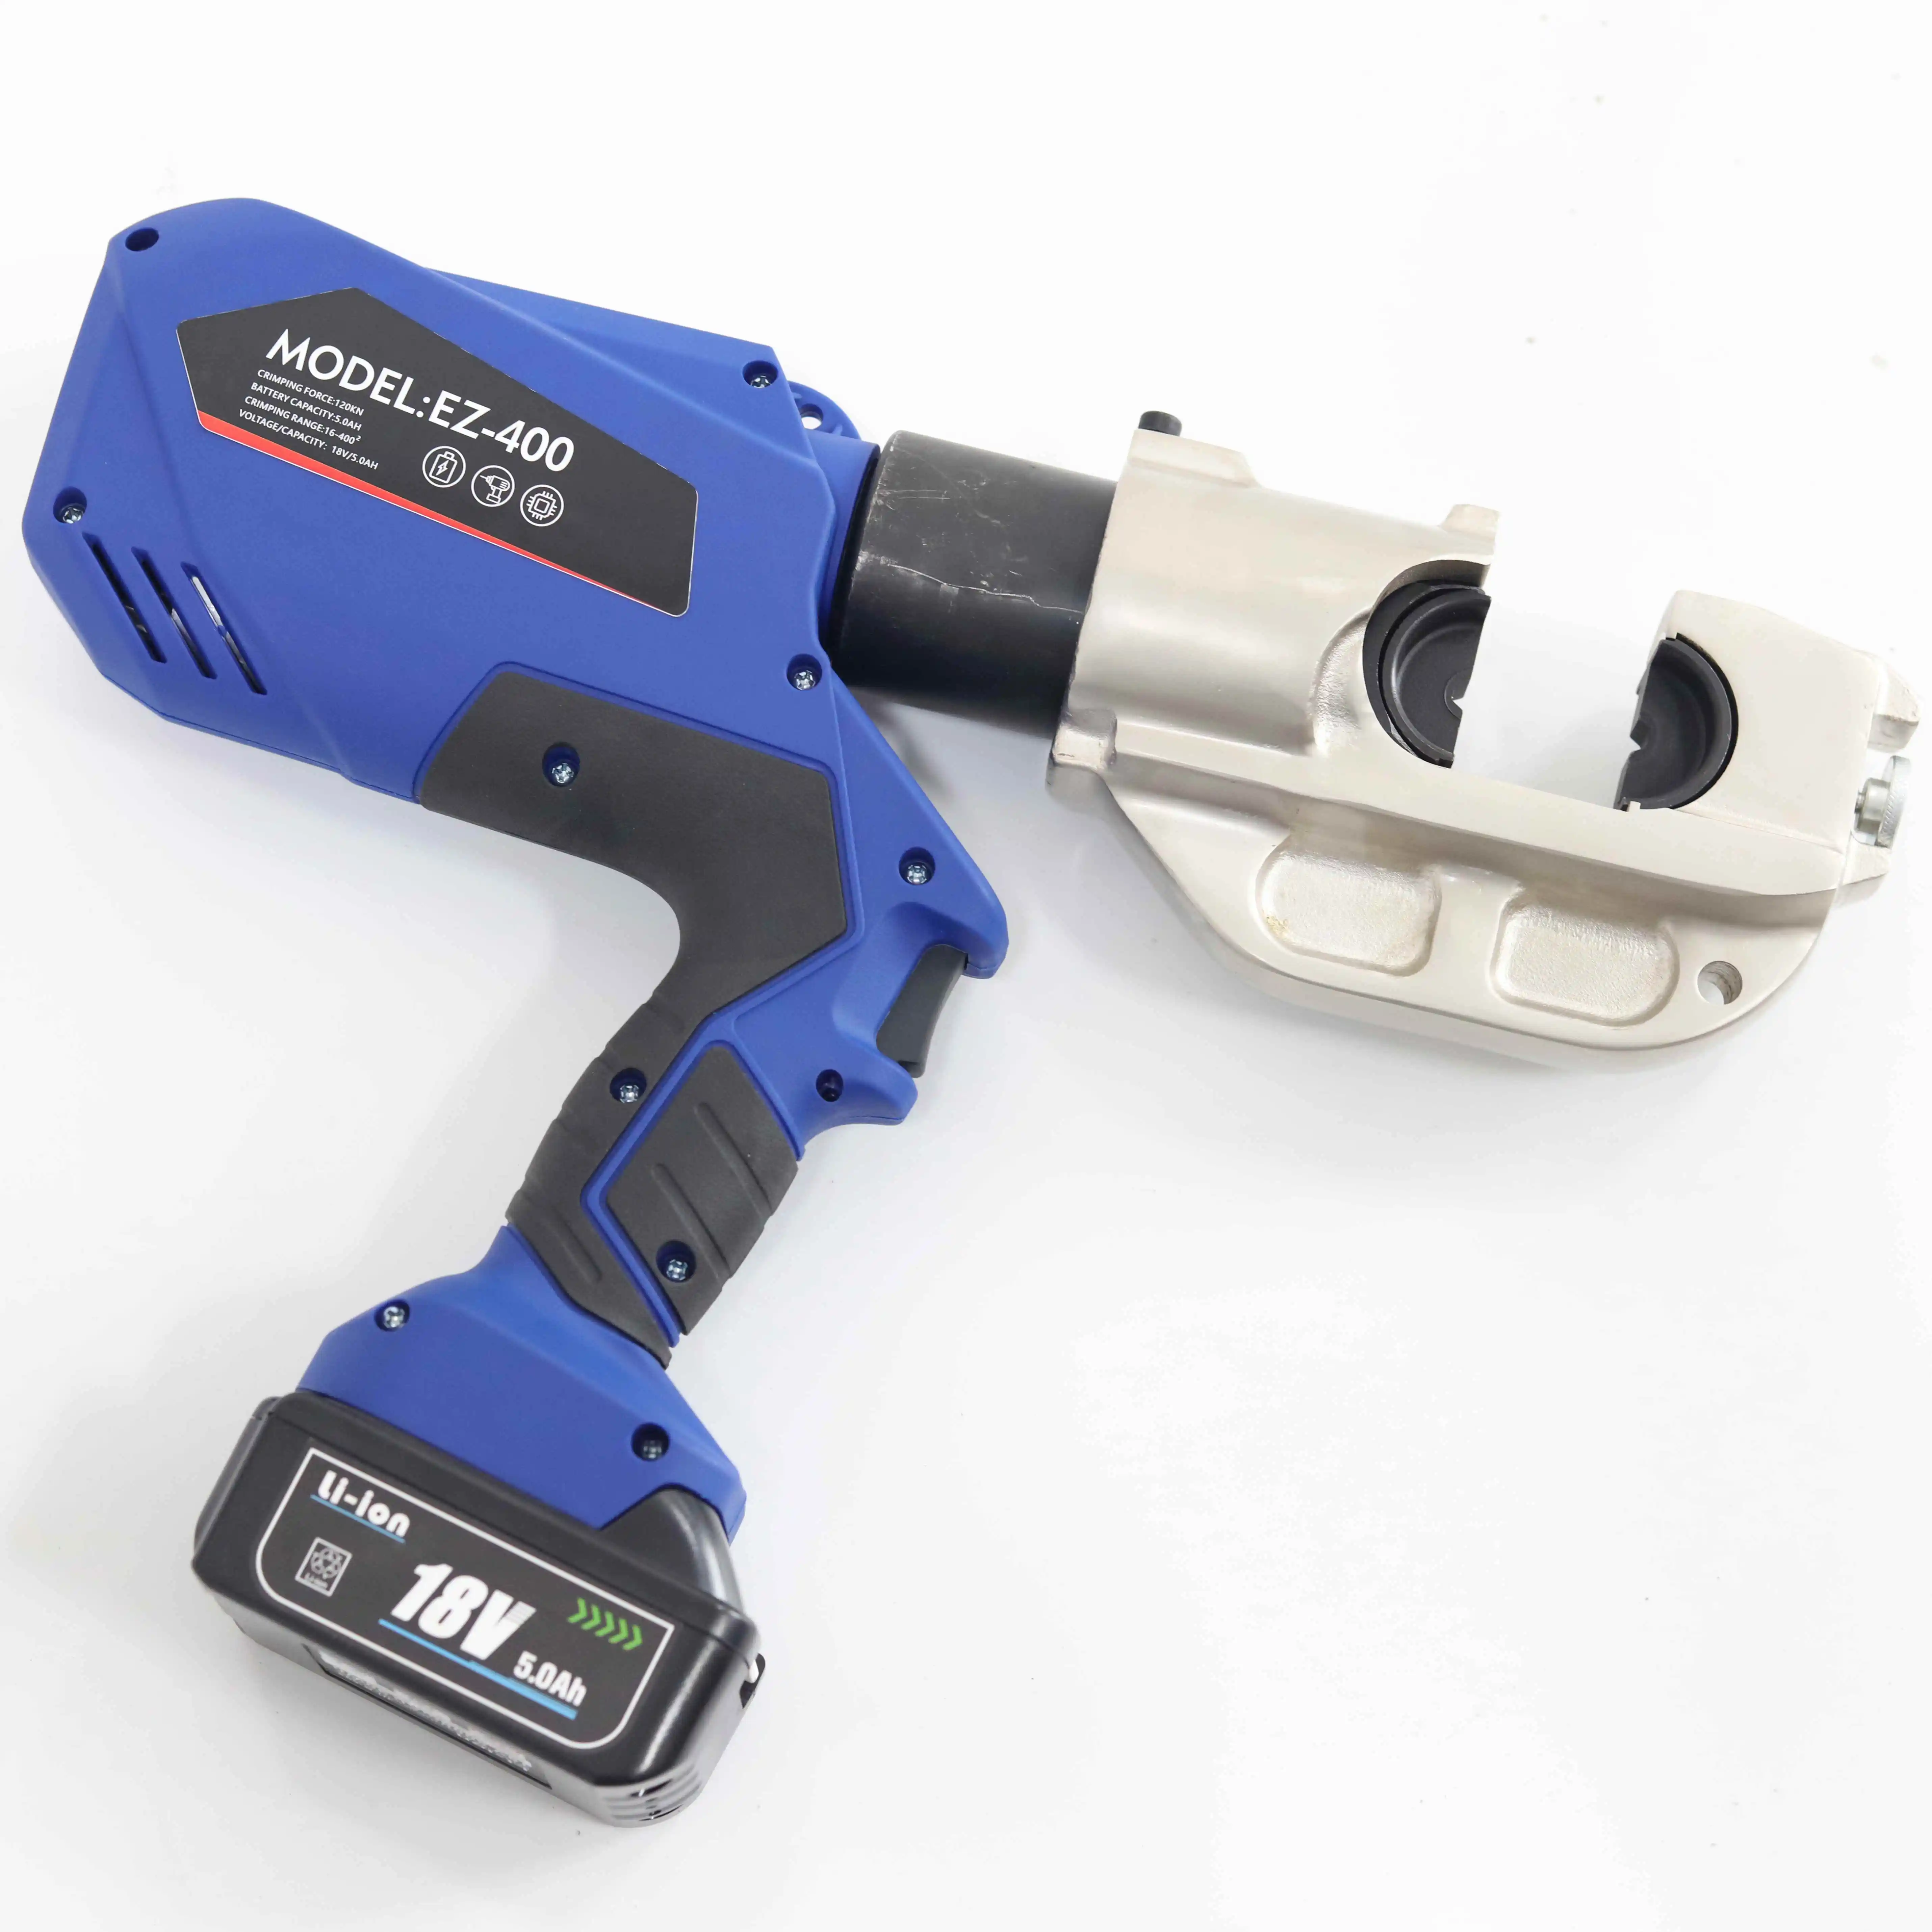 

Hot Sale EZ-300 Hydraulic Cable Crimper Cordless Electric Crimping Tool